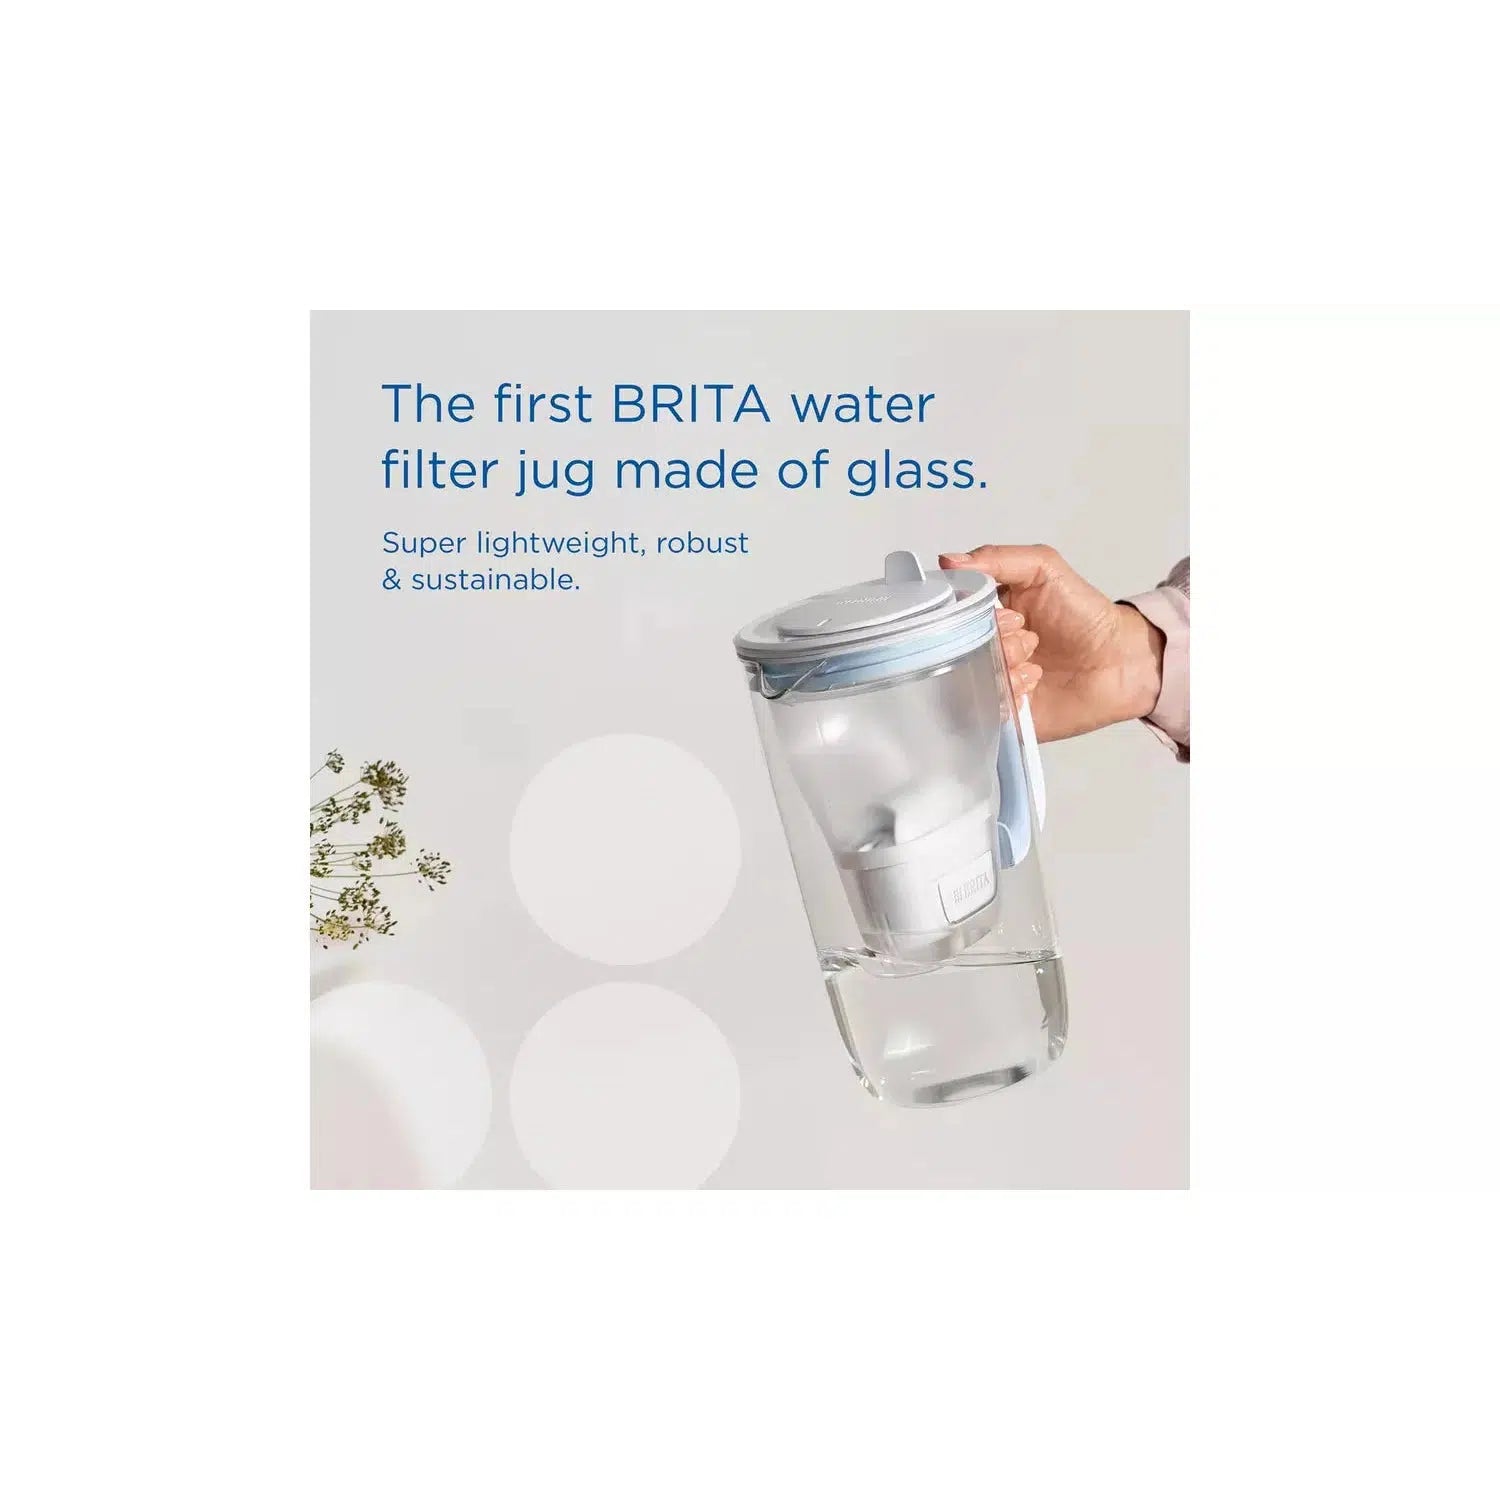 For Brita Water Filter - only €3.29 with